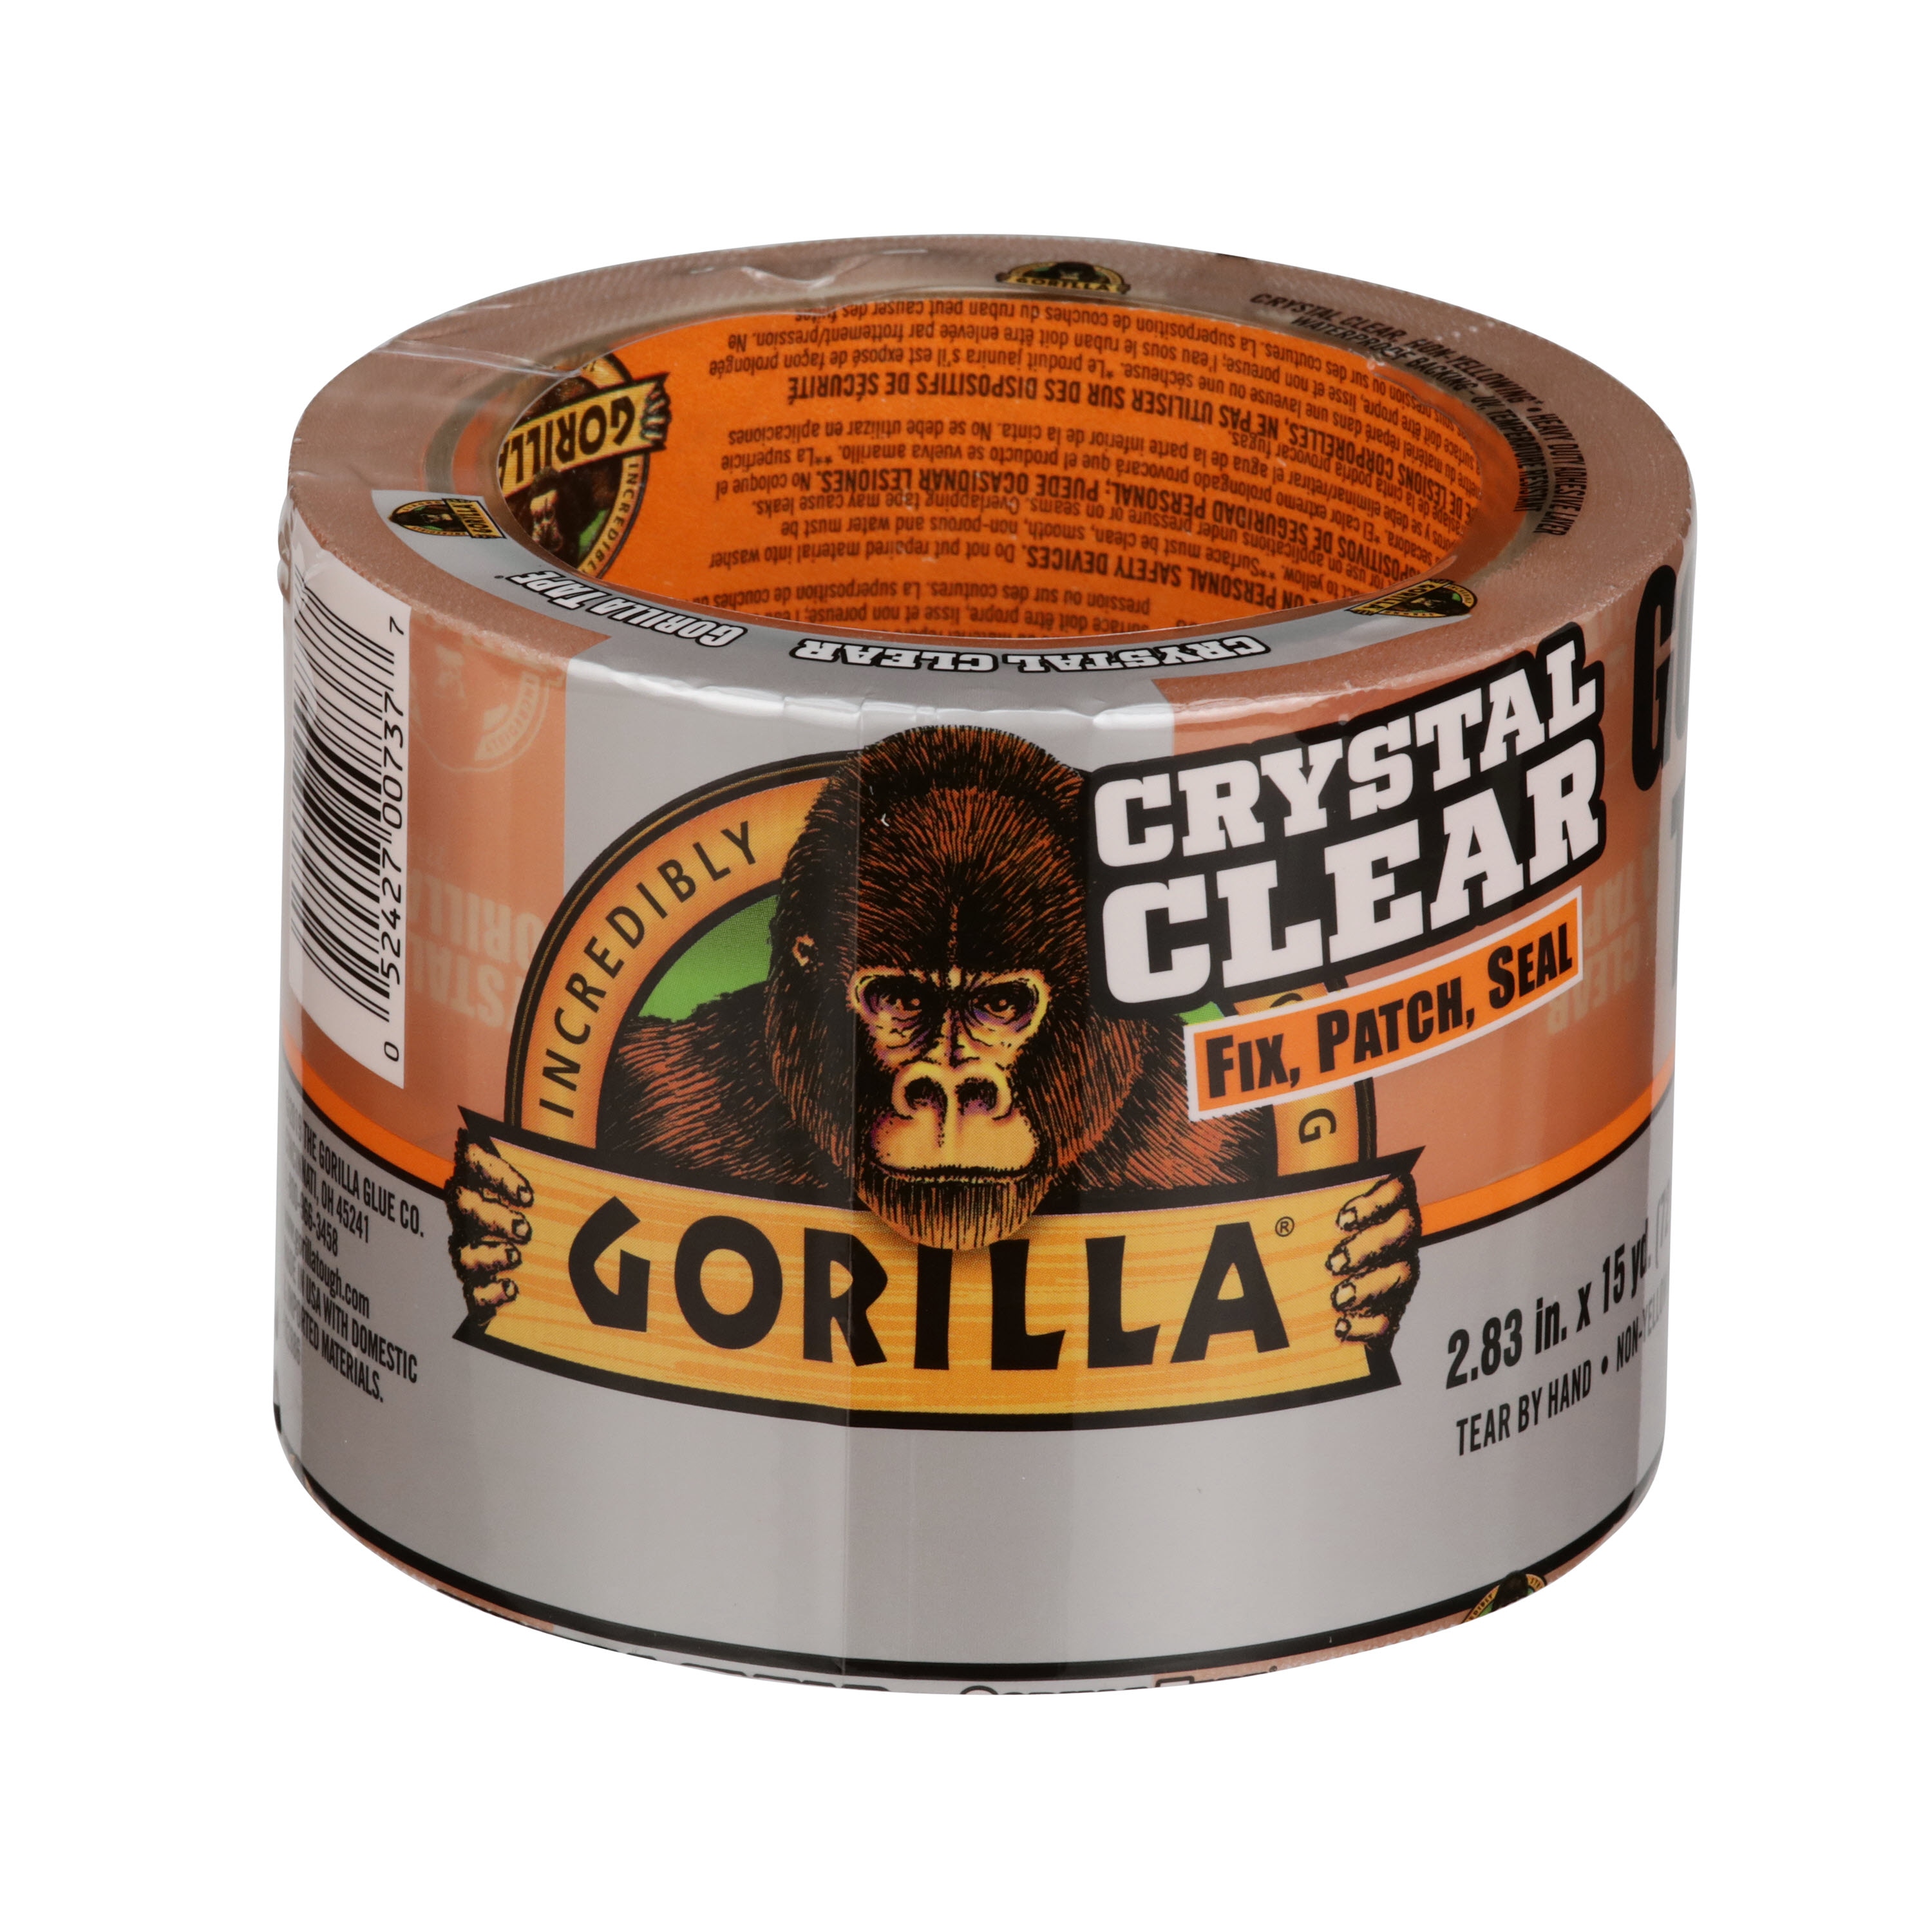 Gorilla 1.88 in. x 9 yds. Crystal Clear Specialty/Anti-Slip Tape